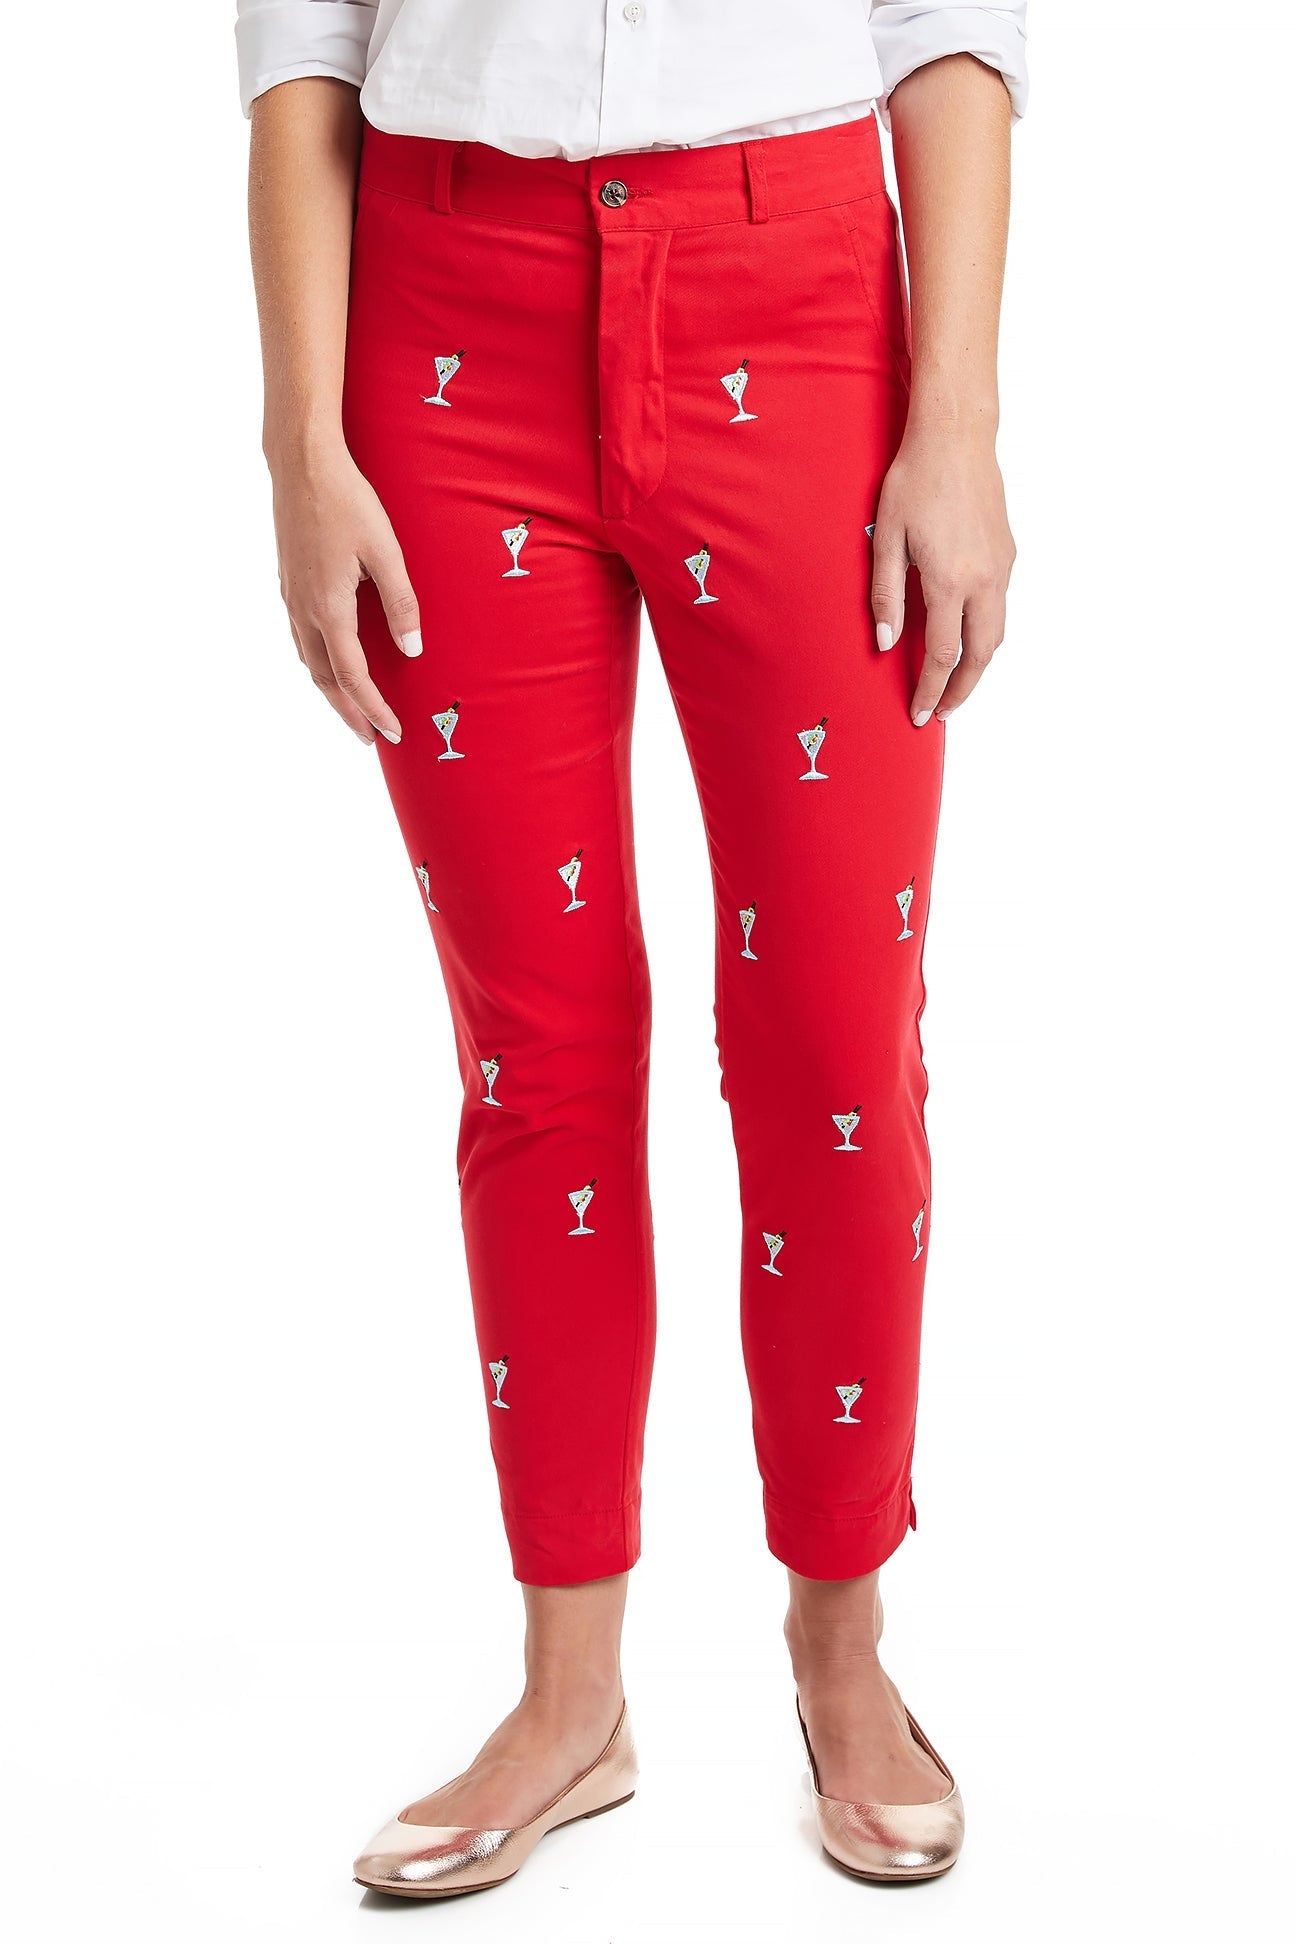 Nantucket Women's Classic Plus Size Capri Jeggings - Red – Spotted